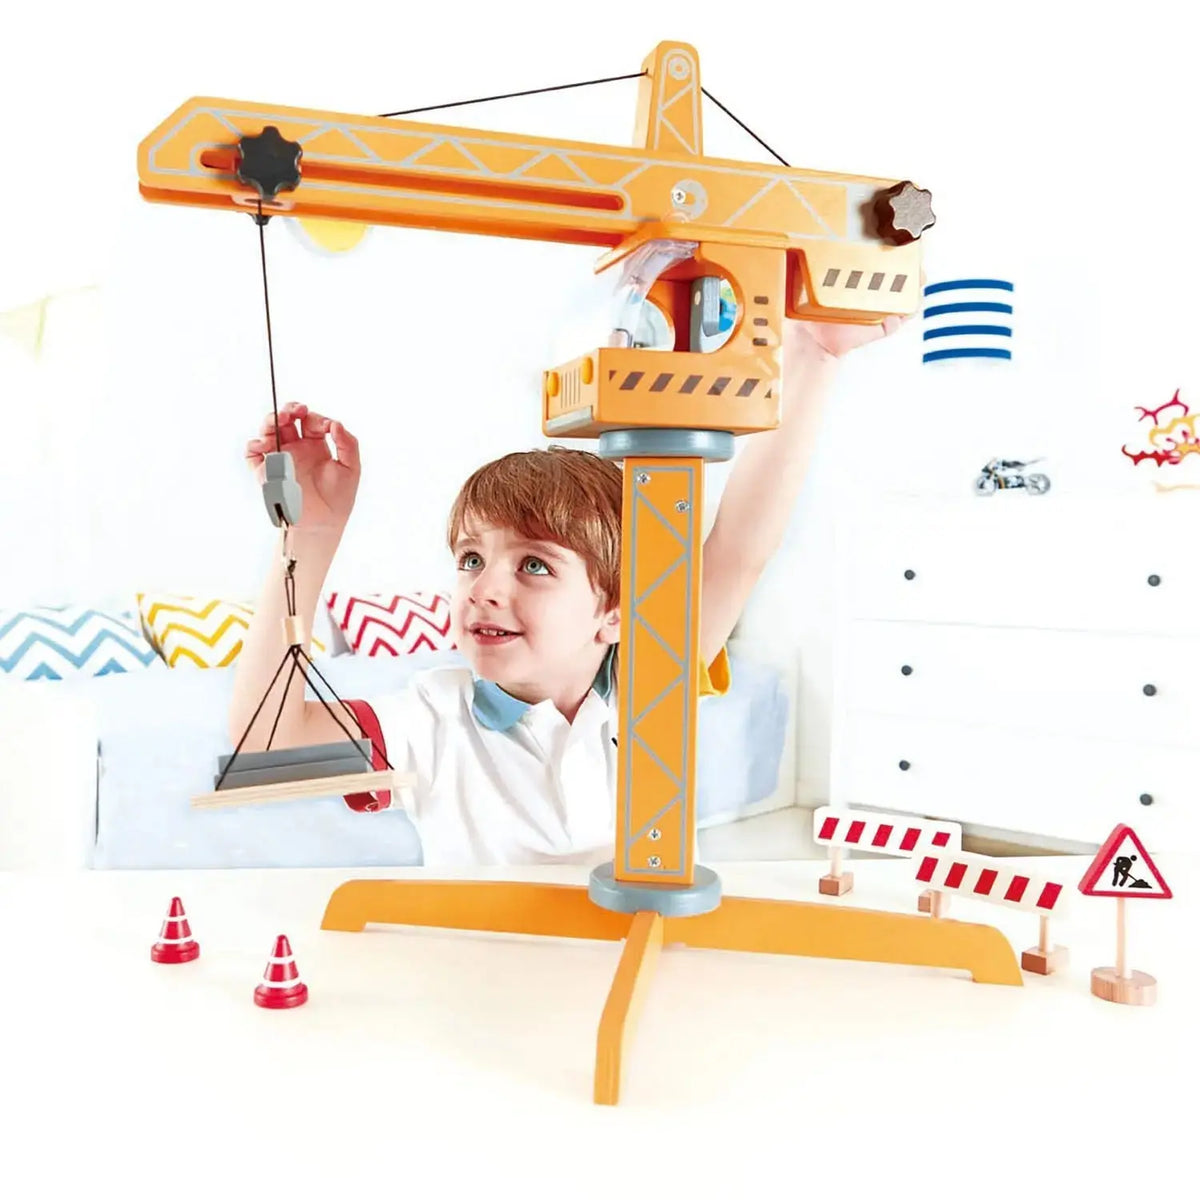 Playscapes Crane Lift Playset Cover